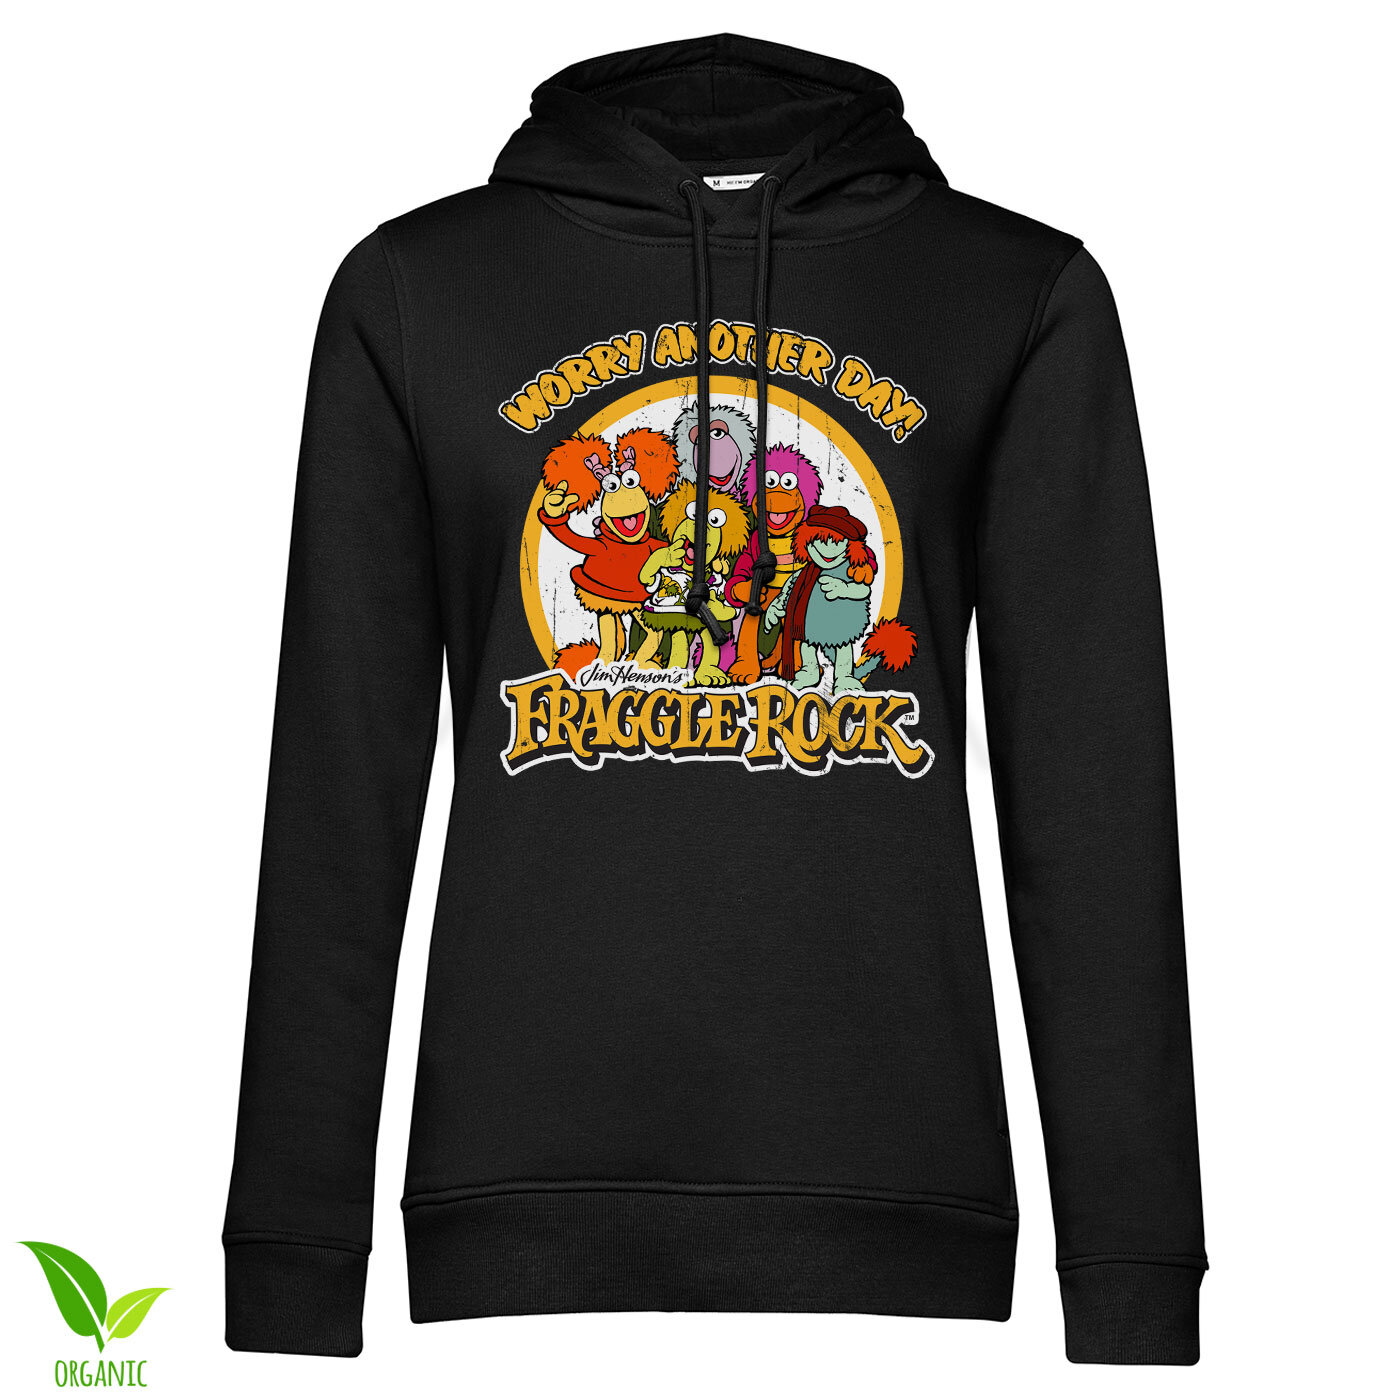 Fraggle Rock - Worry Another Day Girls Hoodie